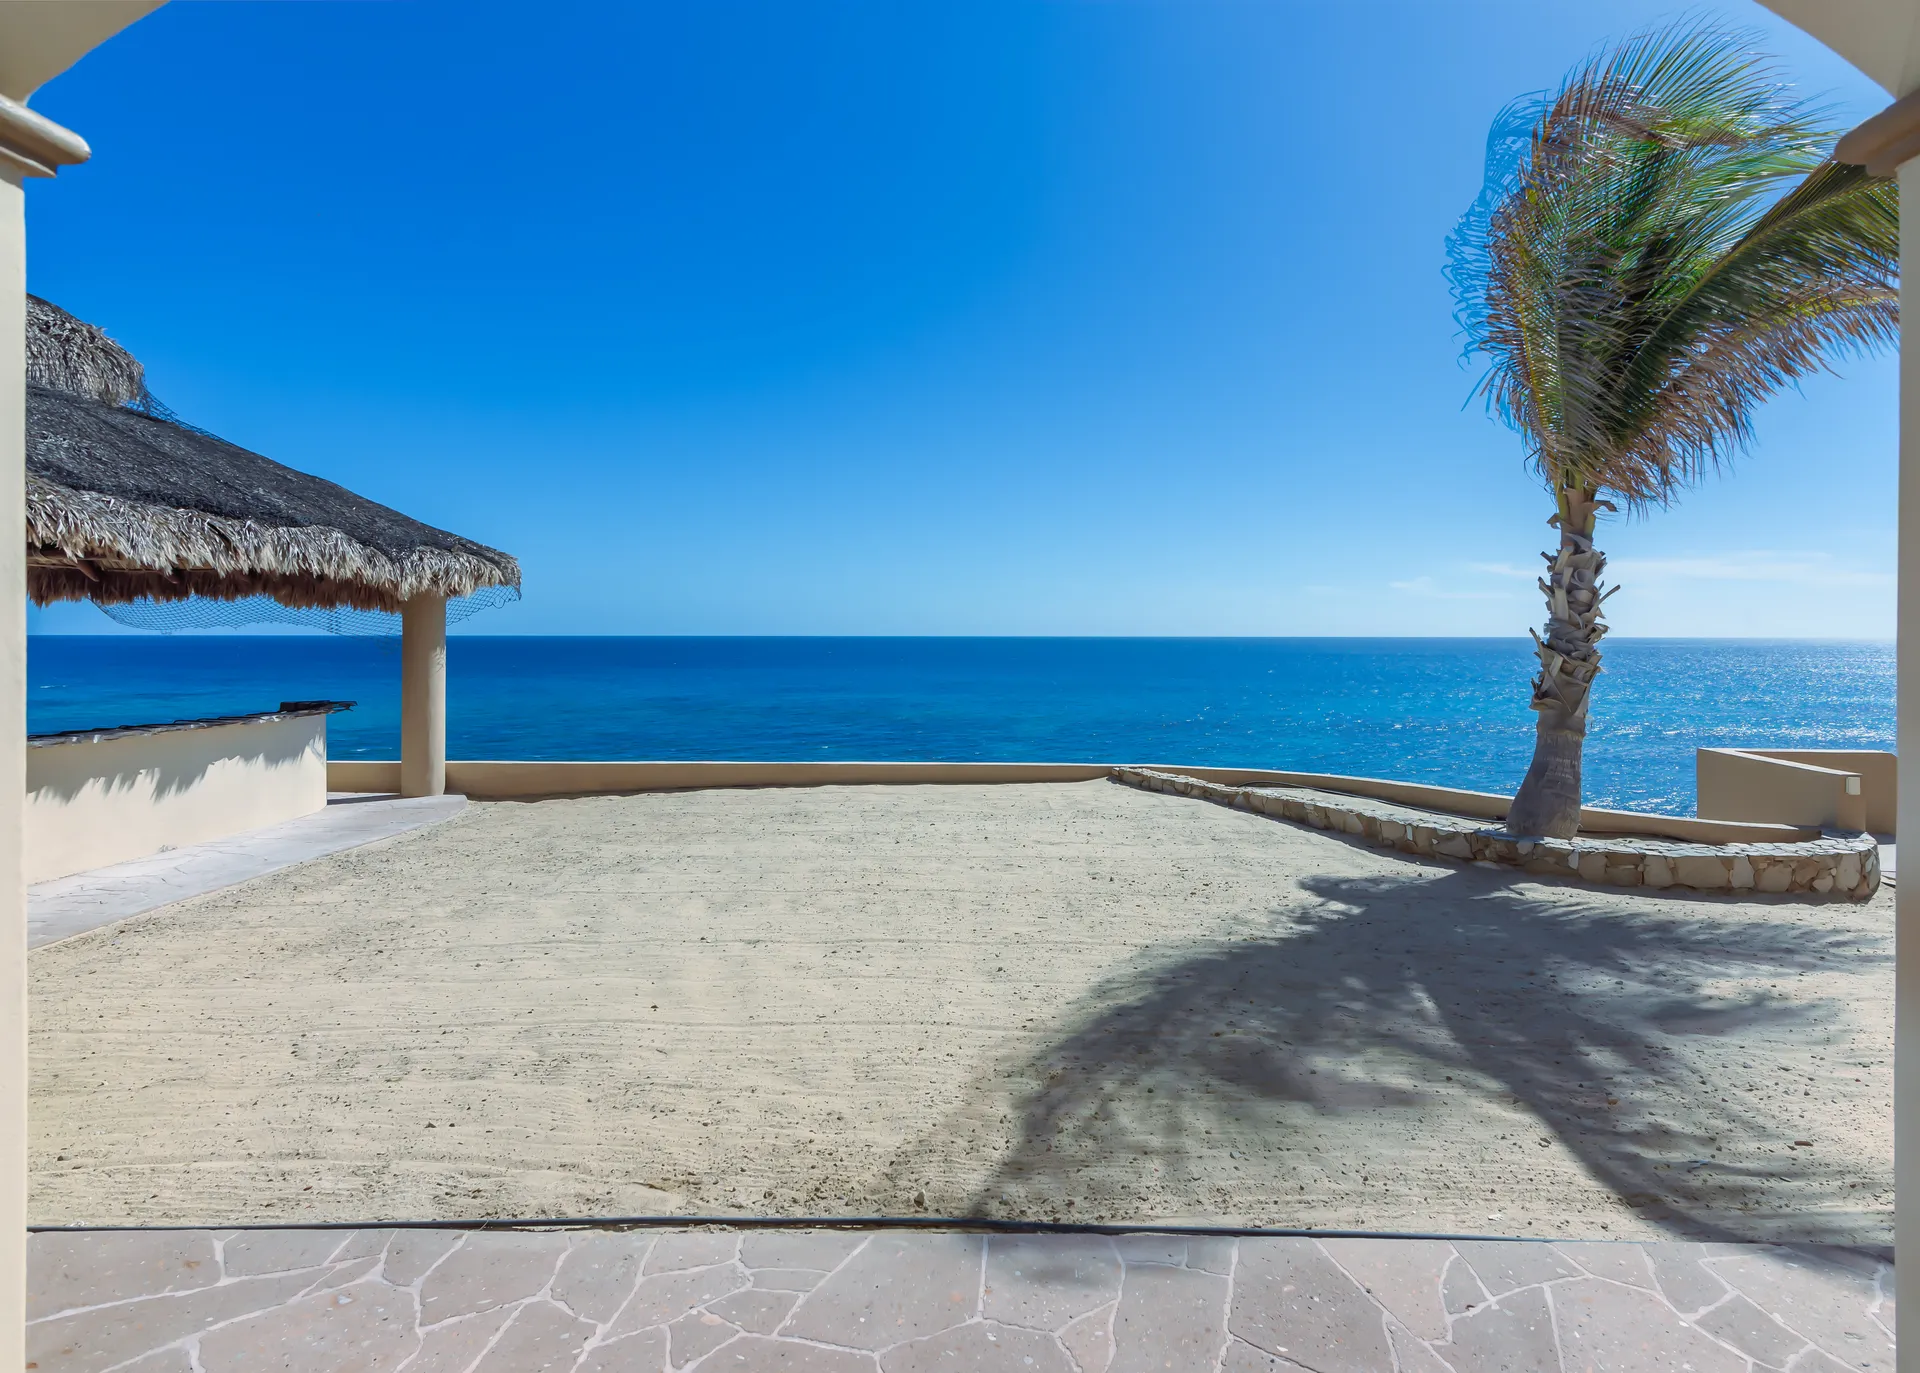 Casa Vista Perfecta is an impeccably maintained 4-bedroom 2.5 bath 2-story home overlooking the famed Punta Perfecta surf break